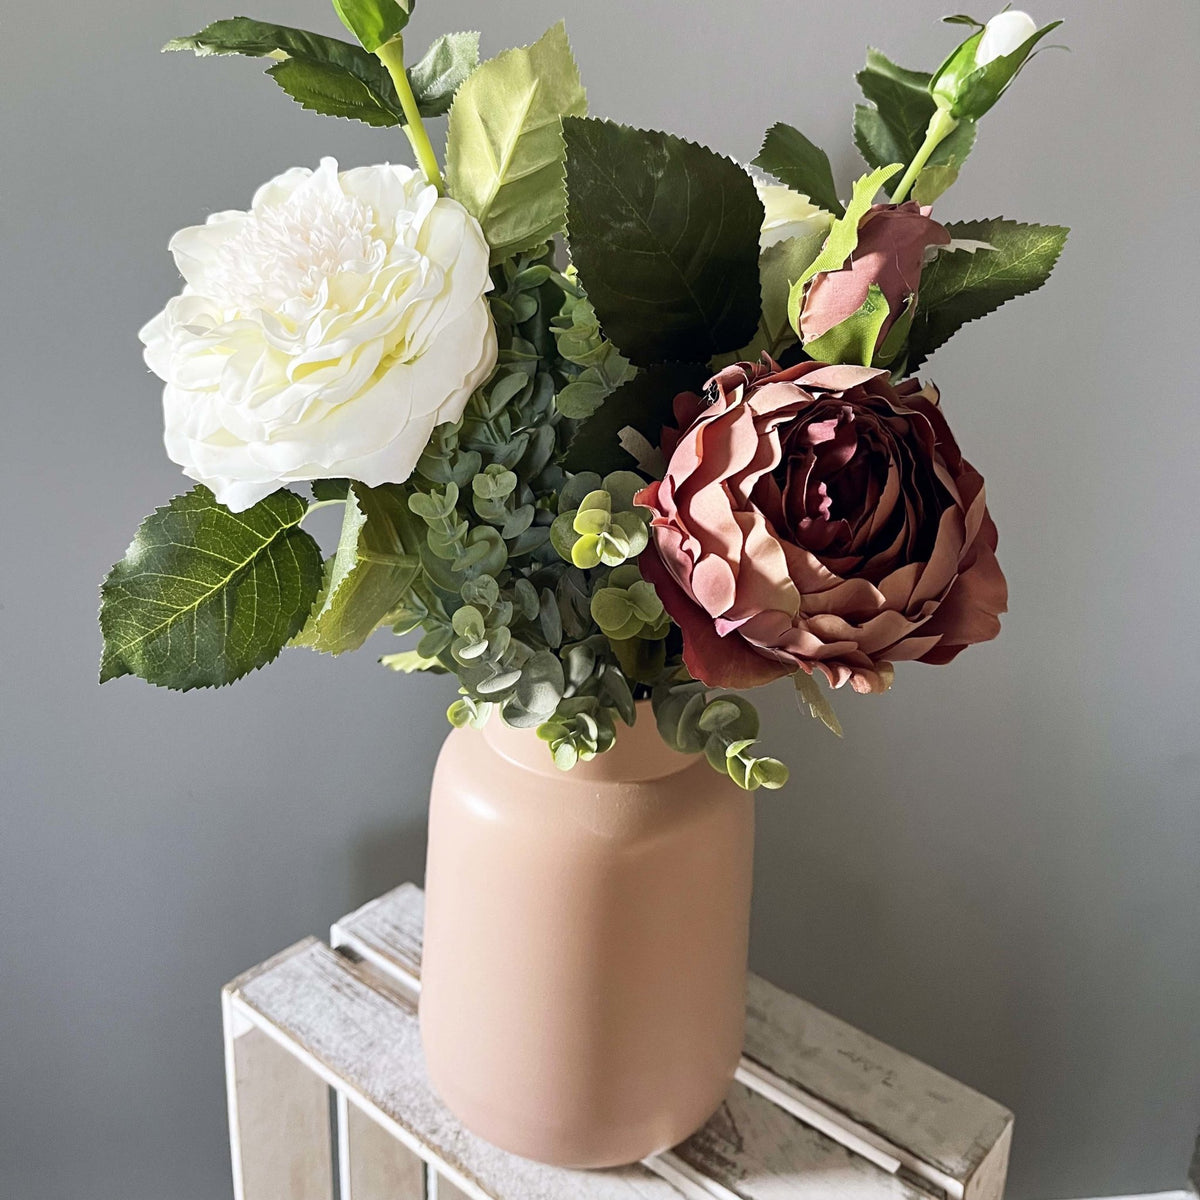 Dusty Pink Spray Rose Peony with leafy spray and white garden rose in pink vase.